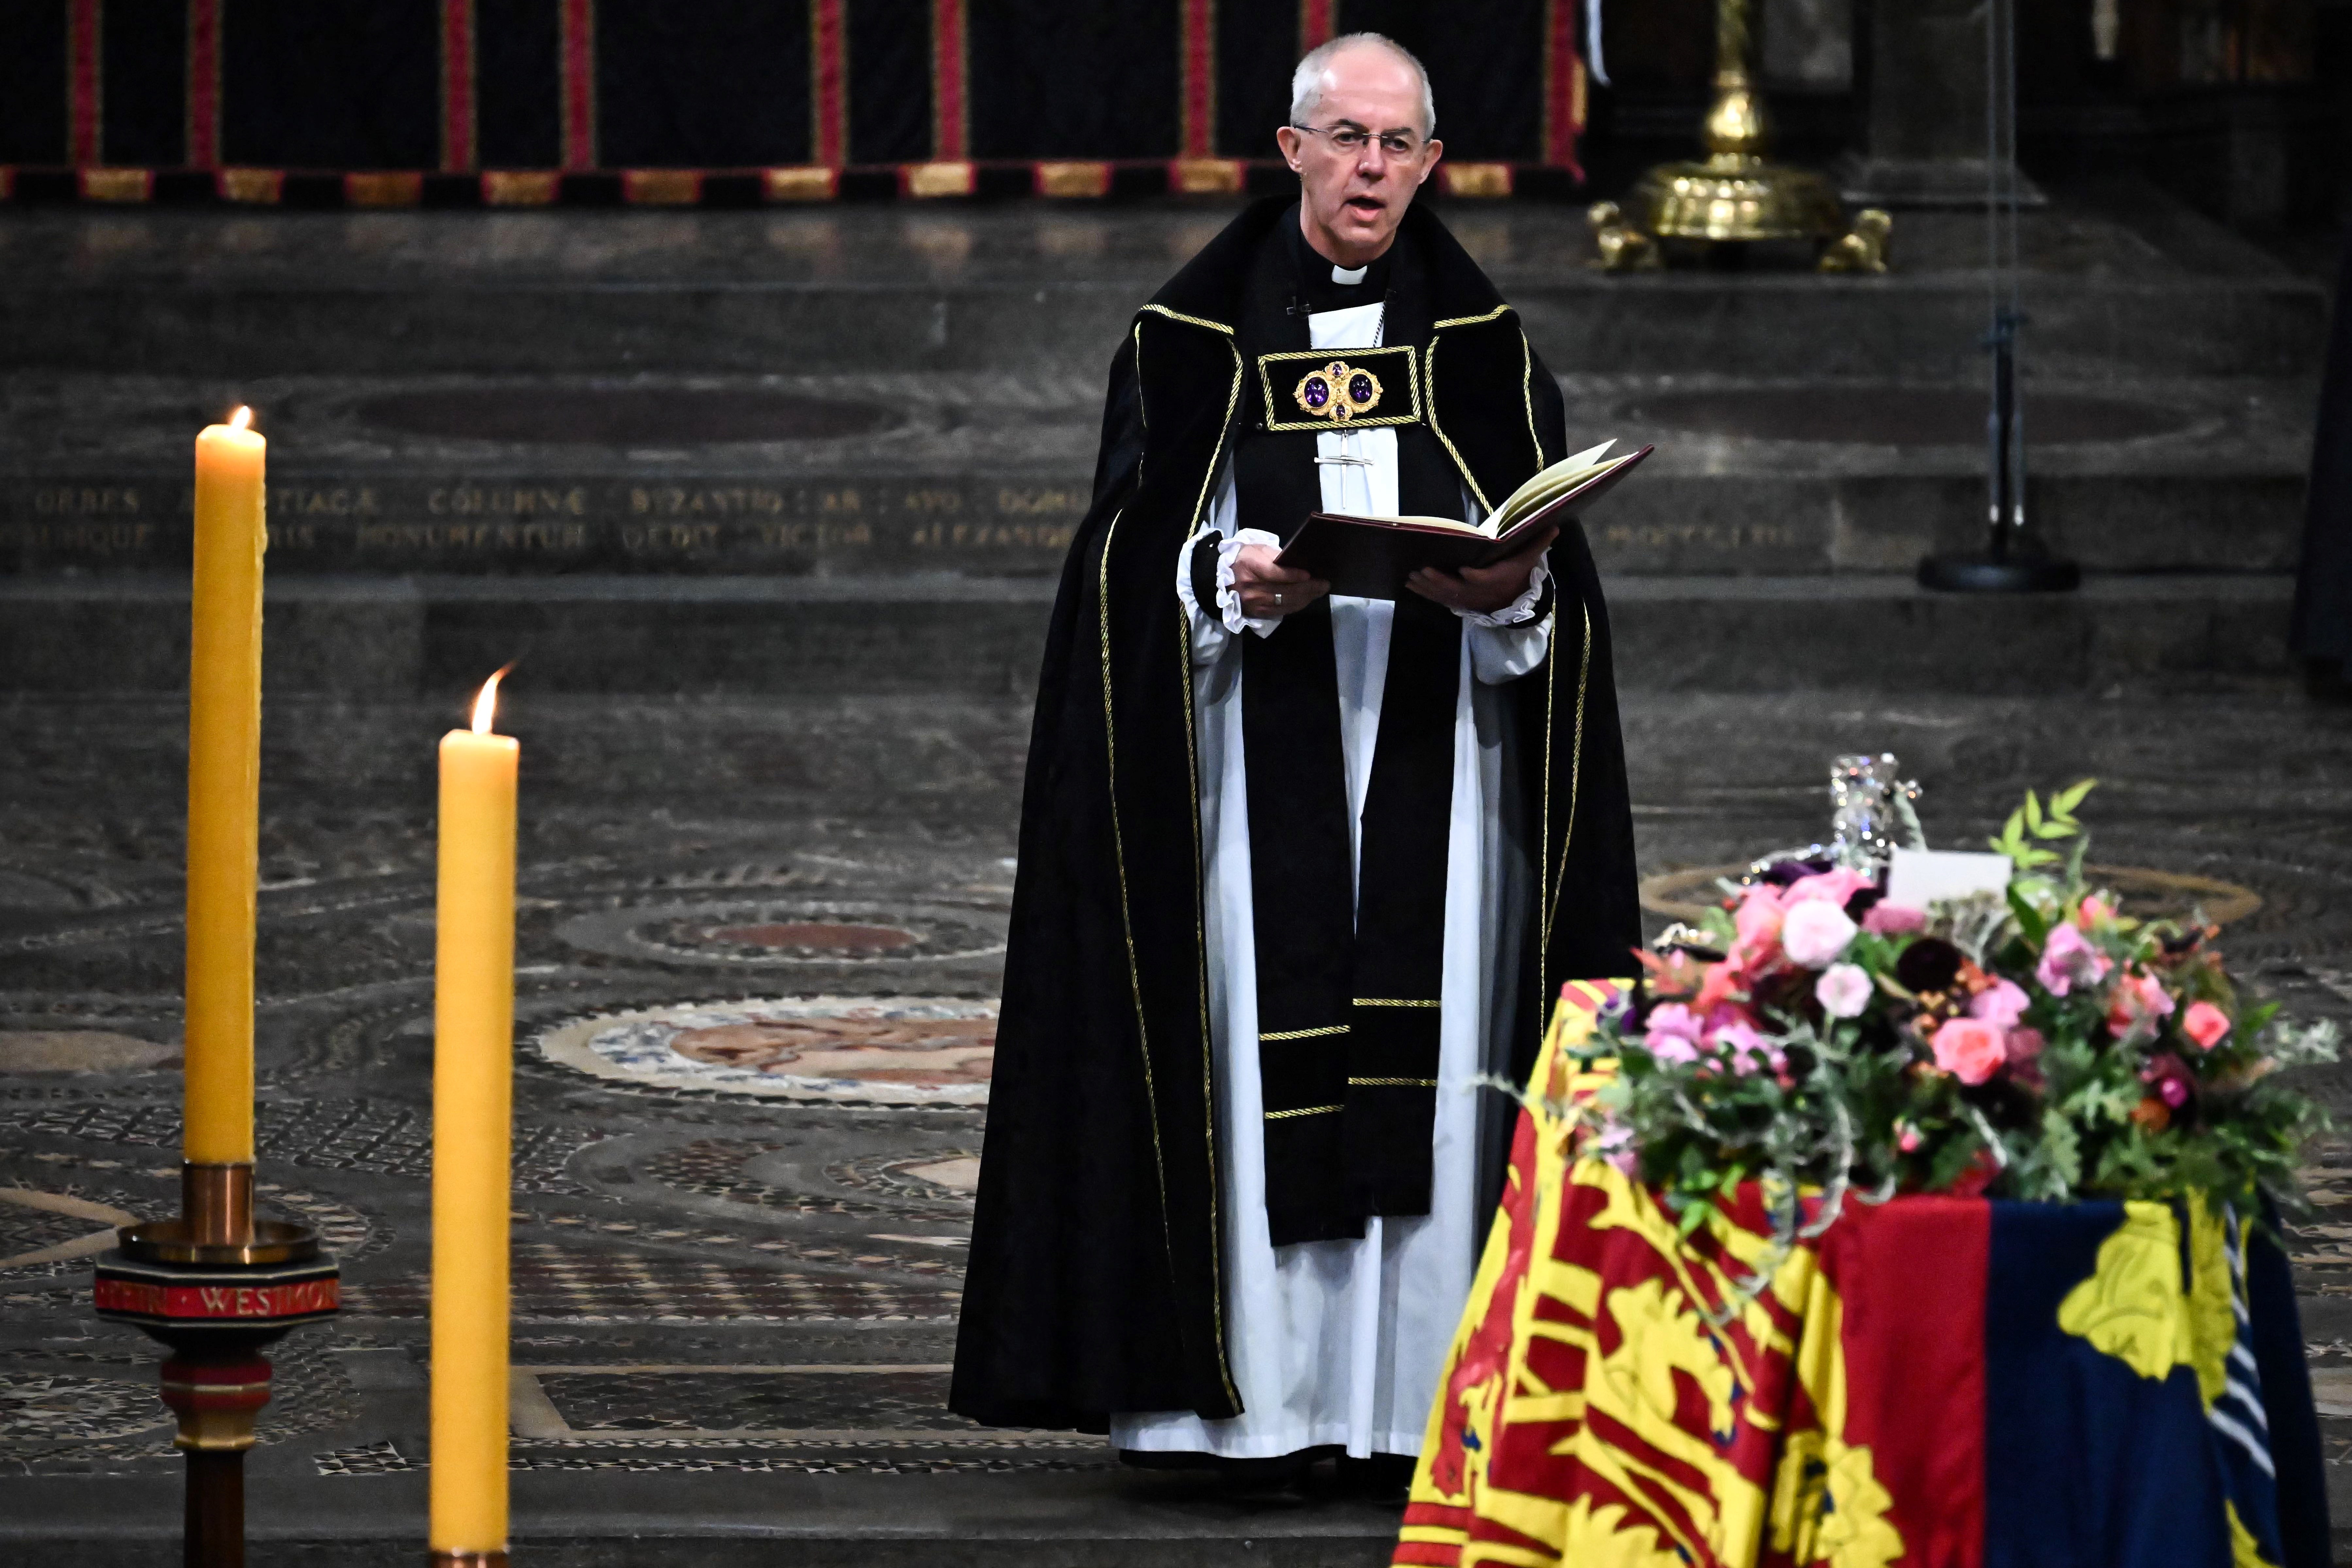 ‘In all cases, those who serve will be loved and remembered when those who cling to power and privileges are long forgotten,’ said Archbishop Welby